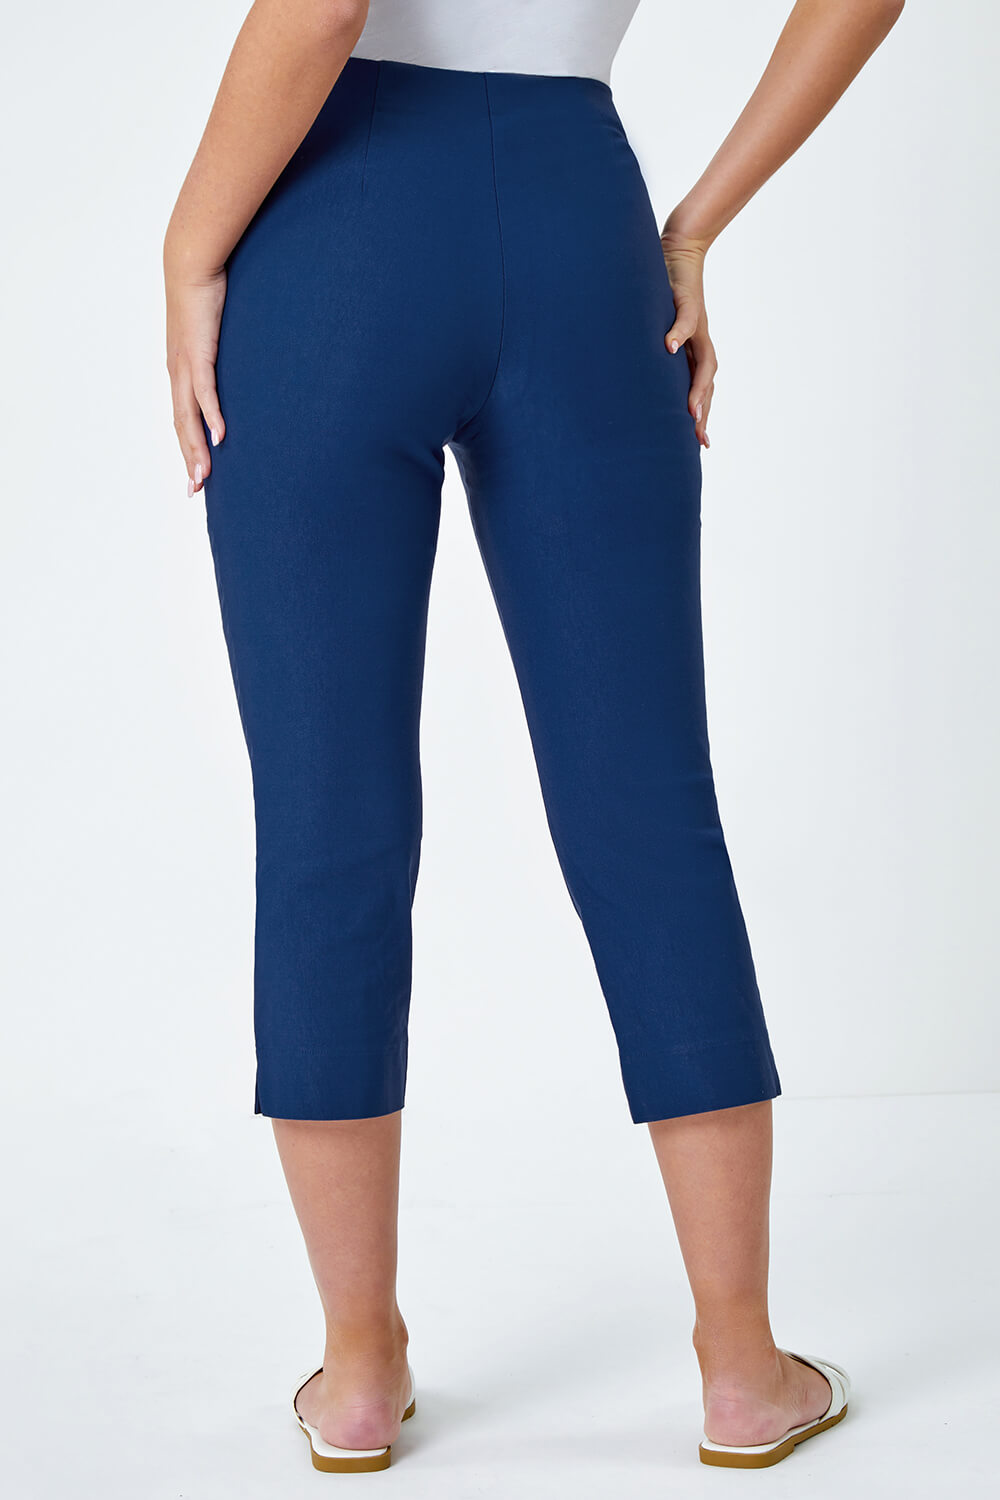 Midnight Blue Petite Cropped Stretch Trousers, Image 3 of 5